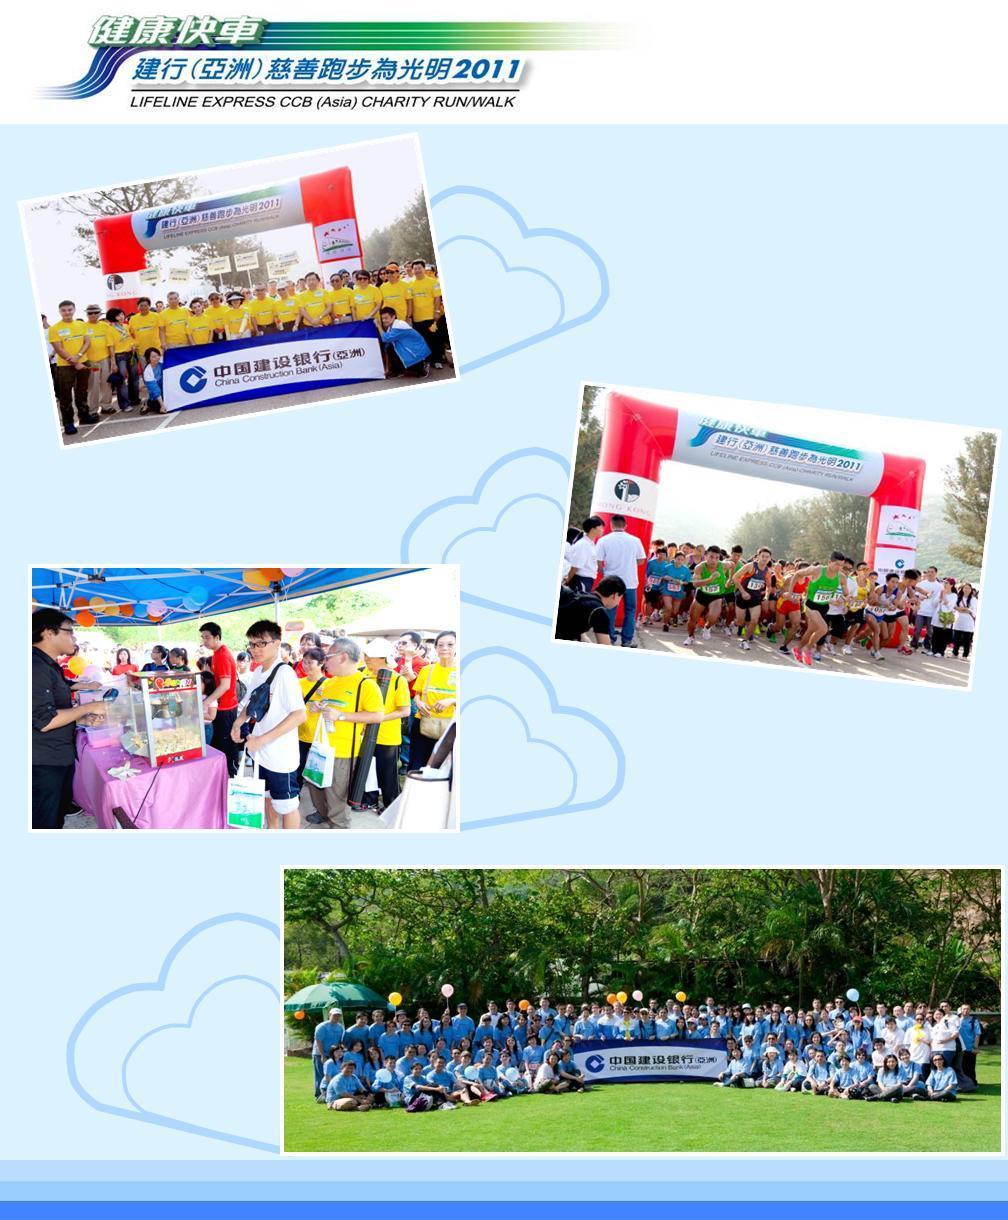 Continued from Page 1 Review of CCB (Asia) s Corporate Social Responsibility Efforts in 2011: Sponsoring and Organizing Large-scale Charity Event Title-sponsored by CCB (Asia) and jointly organized